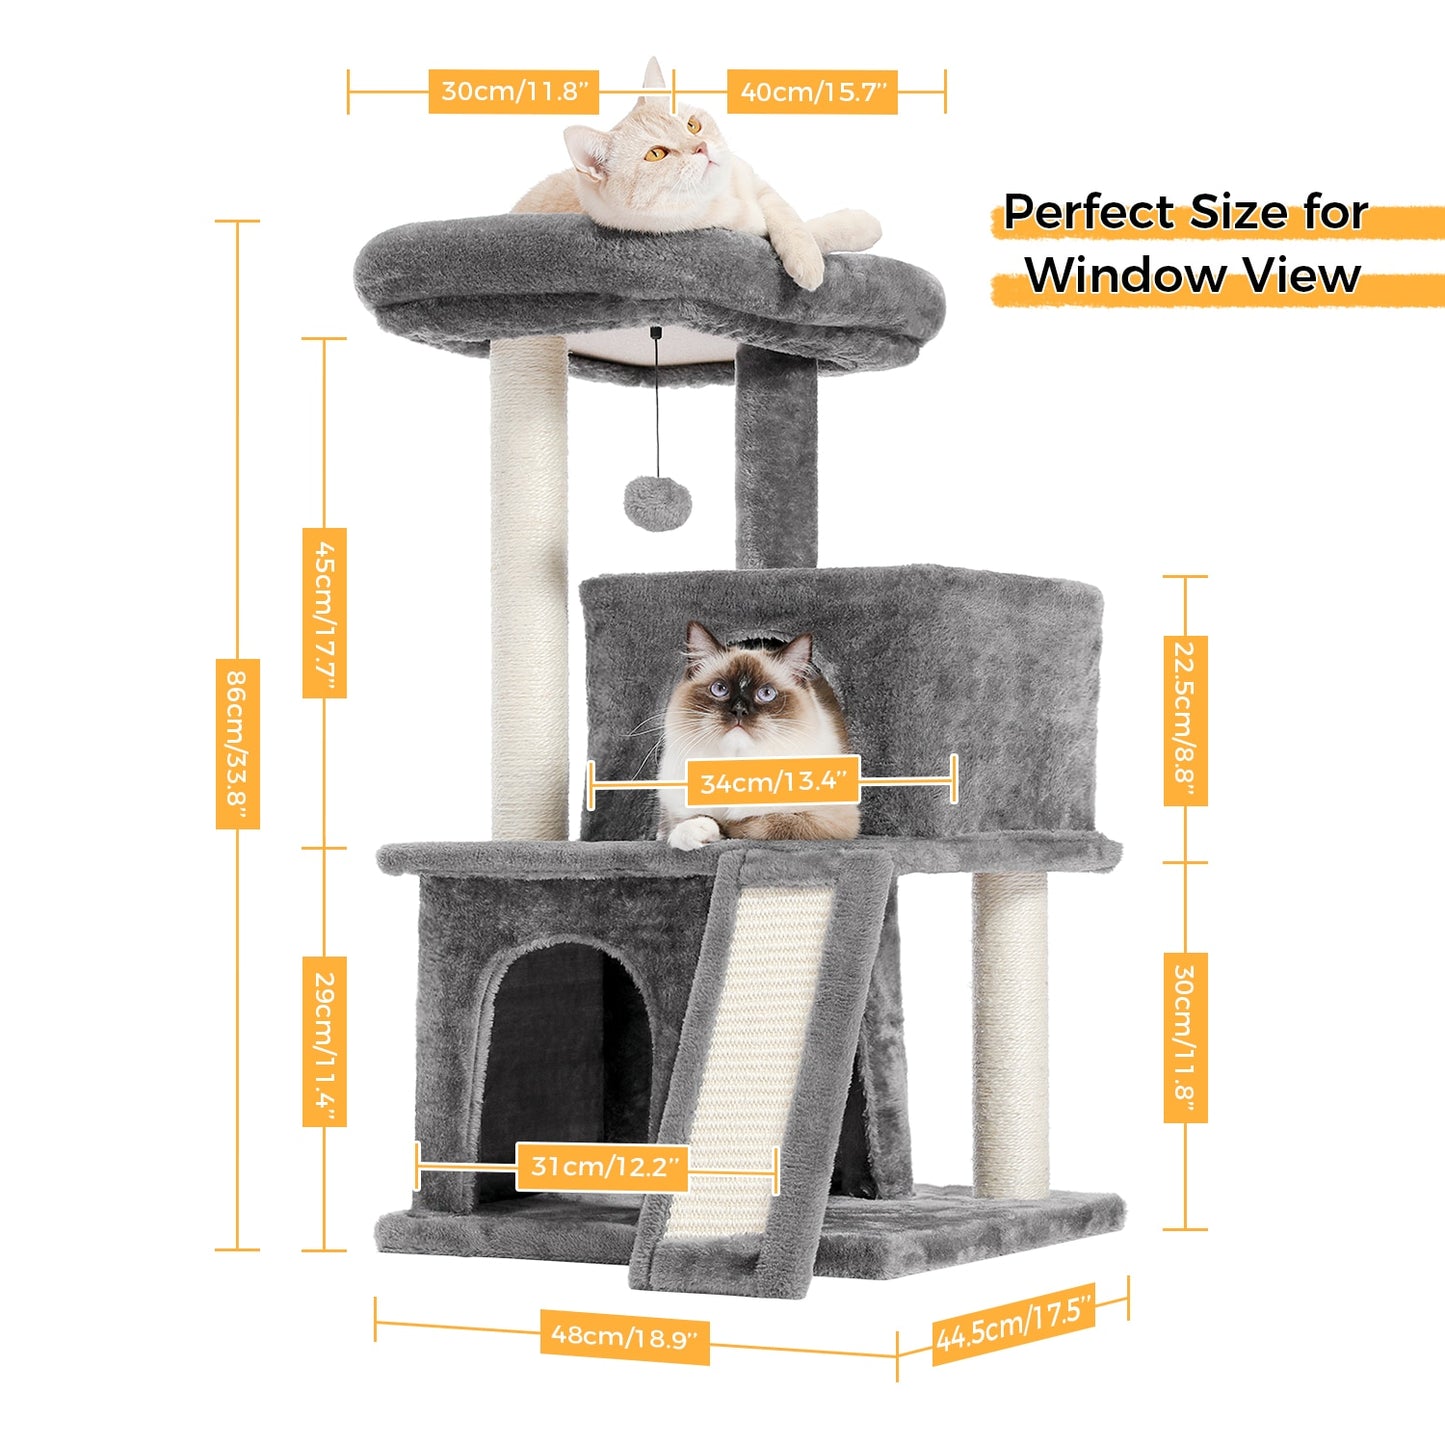 180CM Multi-Level Cat Tree For Cats With Cozy Perches Stable Cat Climbing Frame Cat Scratch Board Toys Gray&amp;Beige